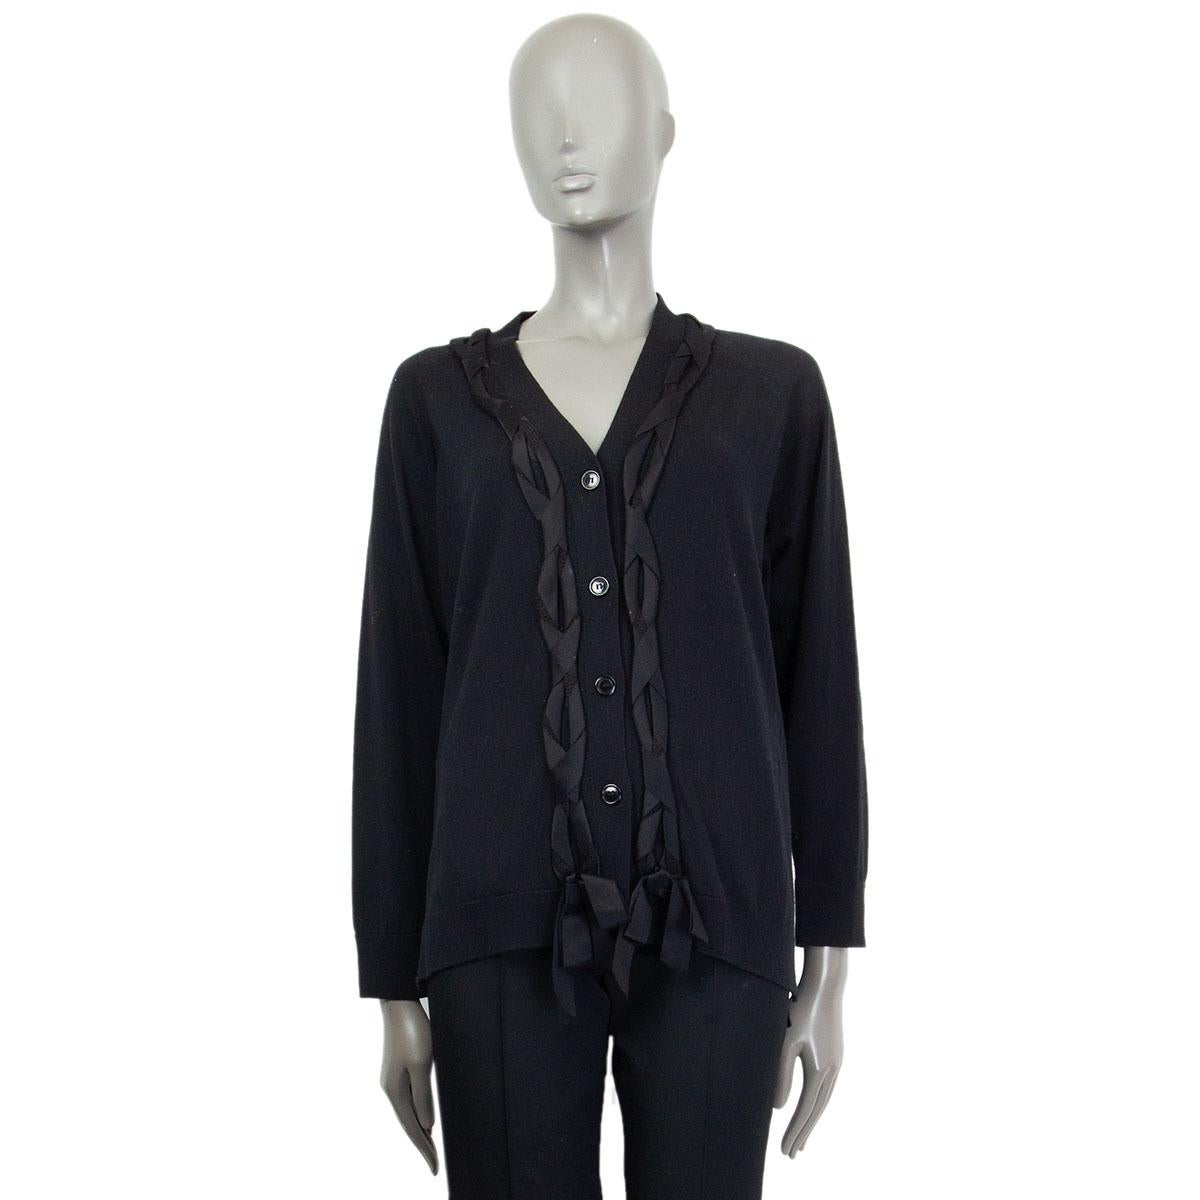 Simone Rocha cardigan in black merino (60%) silk (30%)  cashmere (10%) with a woven detail along the button fastening, ribbed cuffs and hemline. Unlined. Closes with buttons in the front. Has been worn and is in excellent condition.

Tag Size L
Size